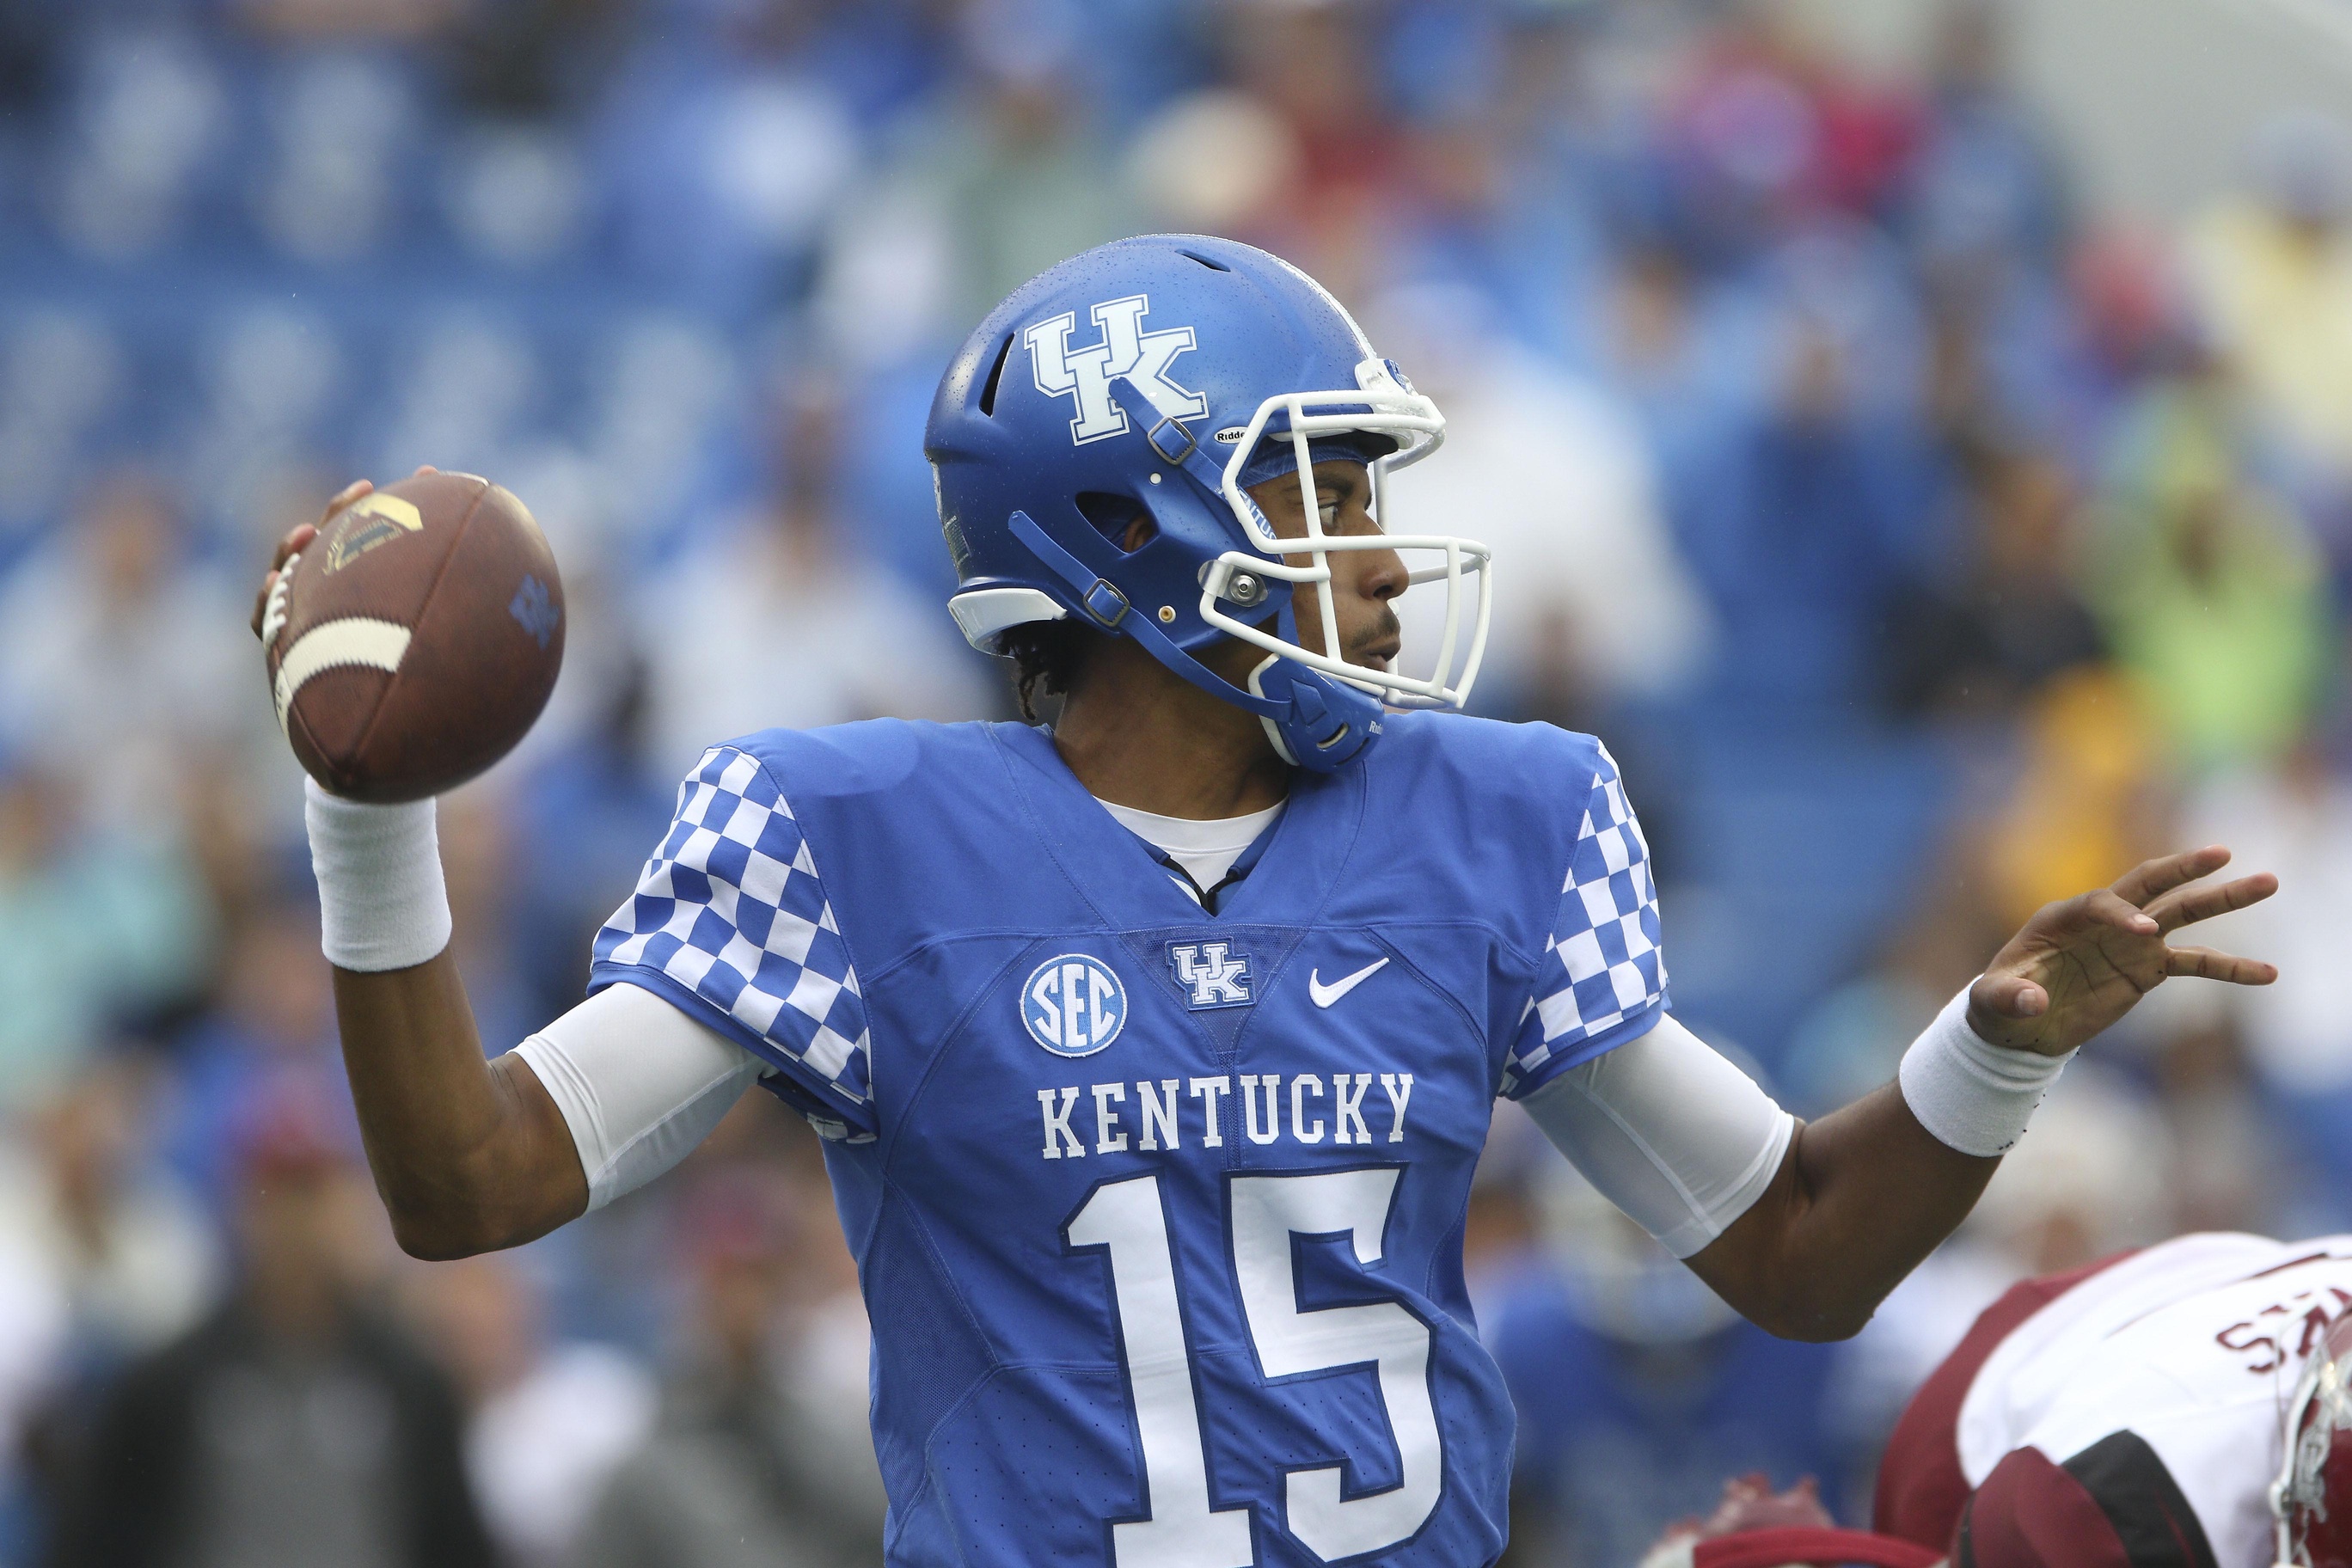 Sep 17, 2016; Lexington, KY, USA; Kentucky Wildcats quarterback Stephen Johnson (15) drops back to pass the ball against the New Mexico State Aggies in the first quarter at Commonwealth Stadium. Mandatory Credit: Mark Zerof-USA TODAY Sports